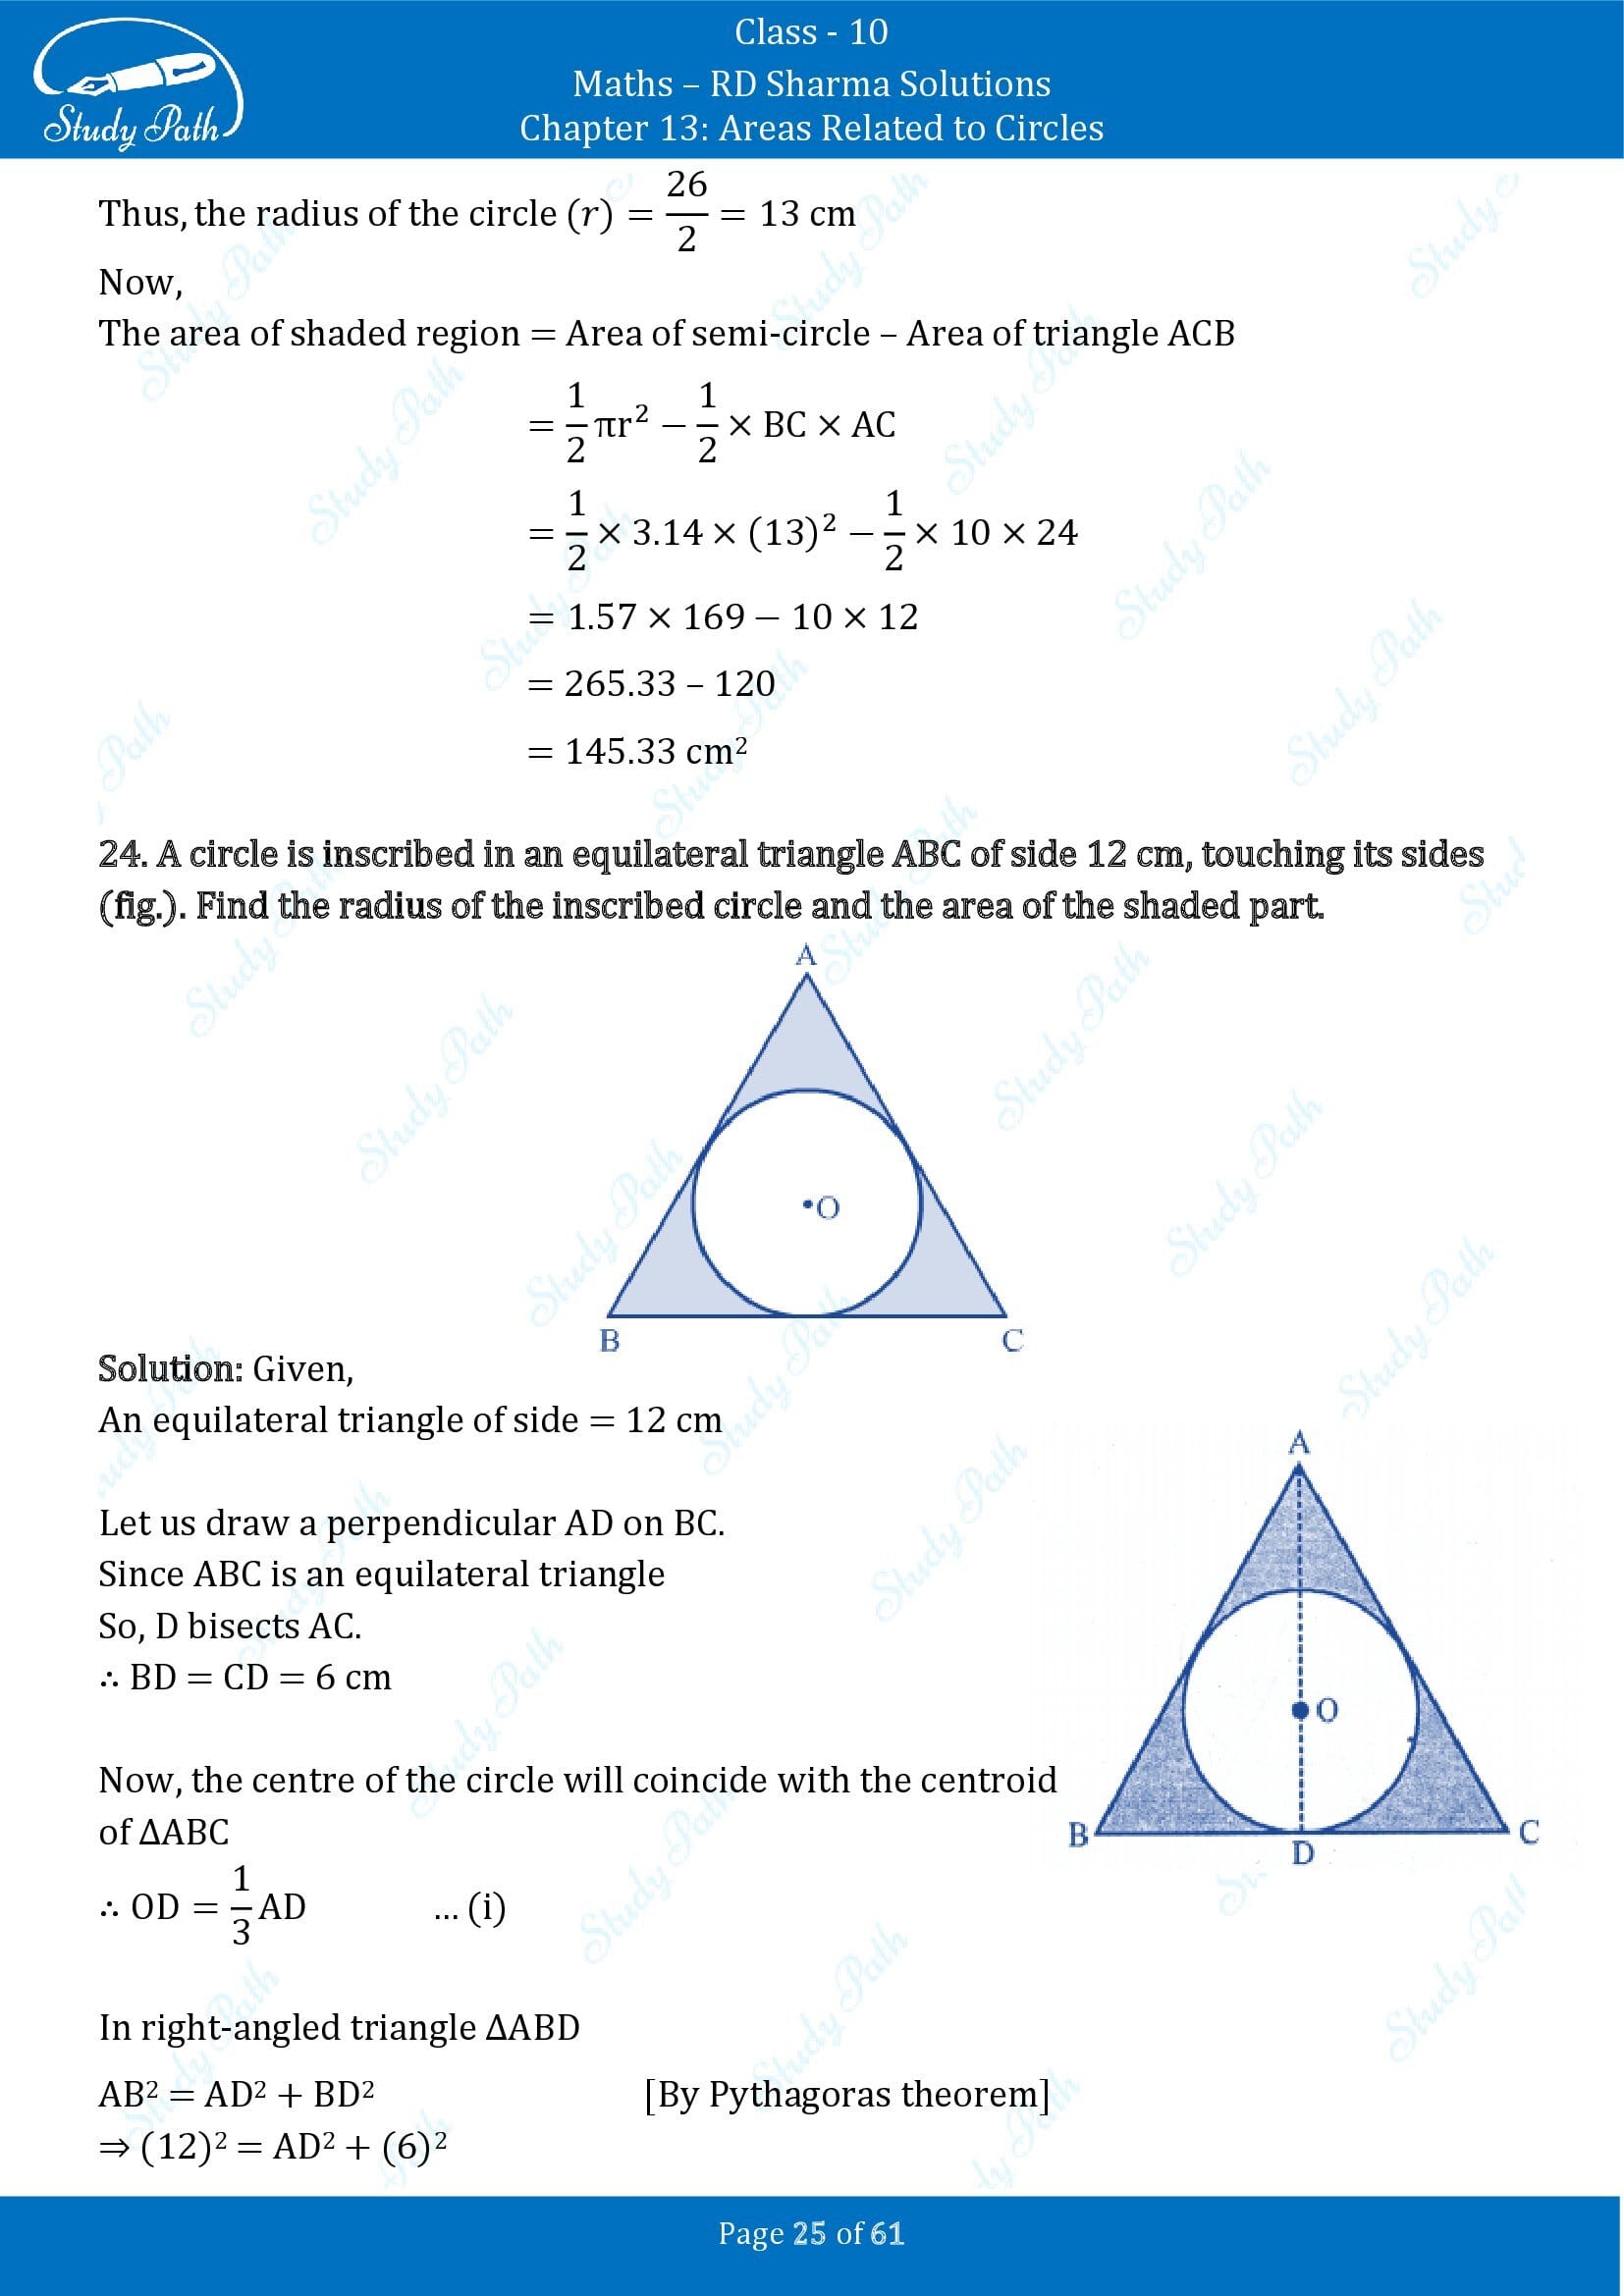 RD Sharma Solutions Class 10 Chapter 13 Areas Related to Circles Exercise 13.4 00025